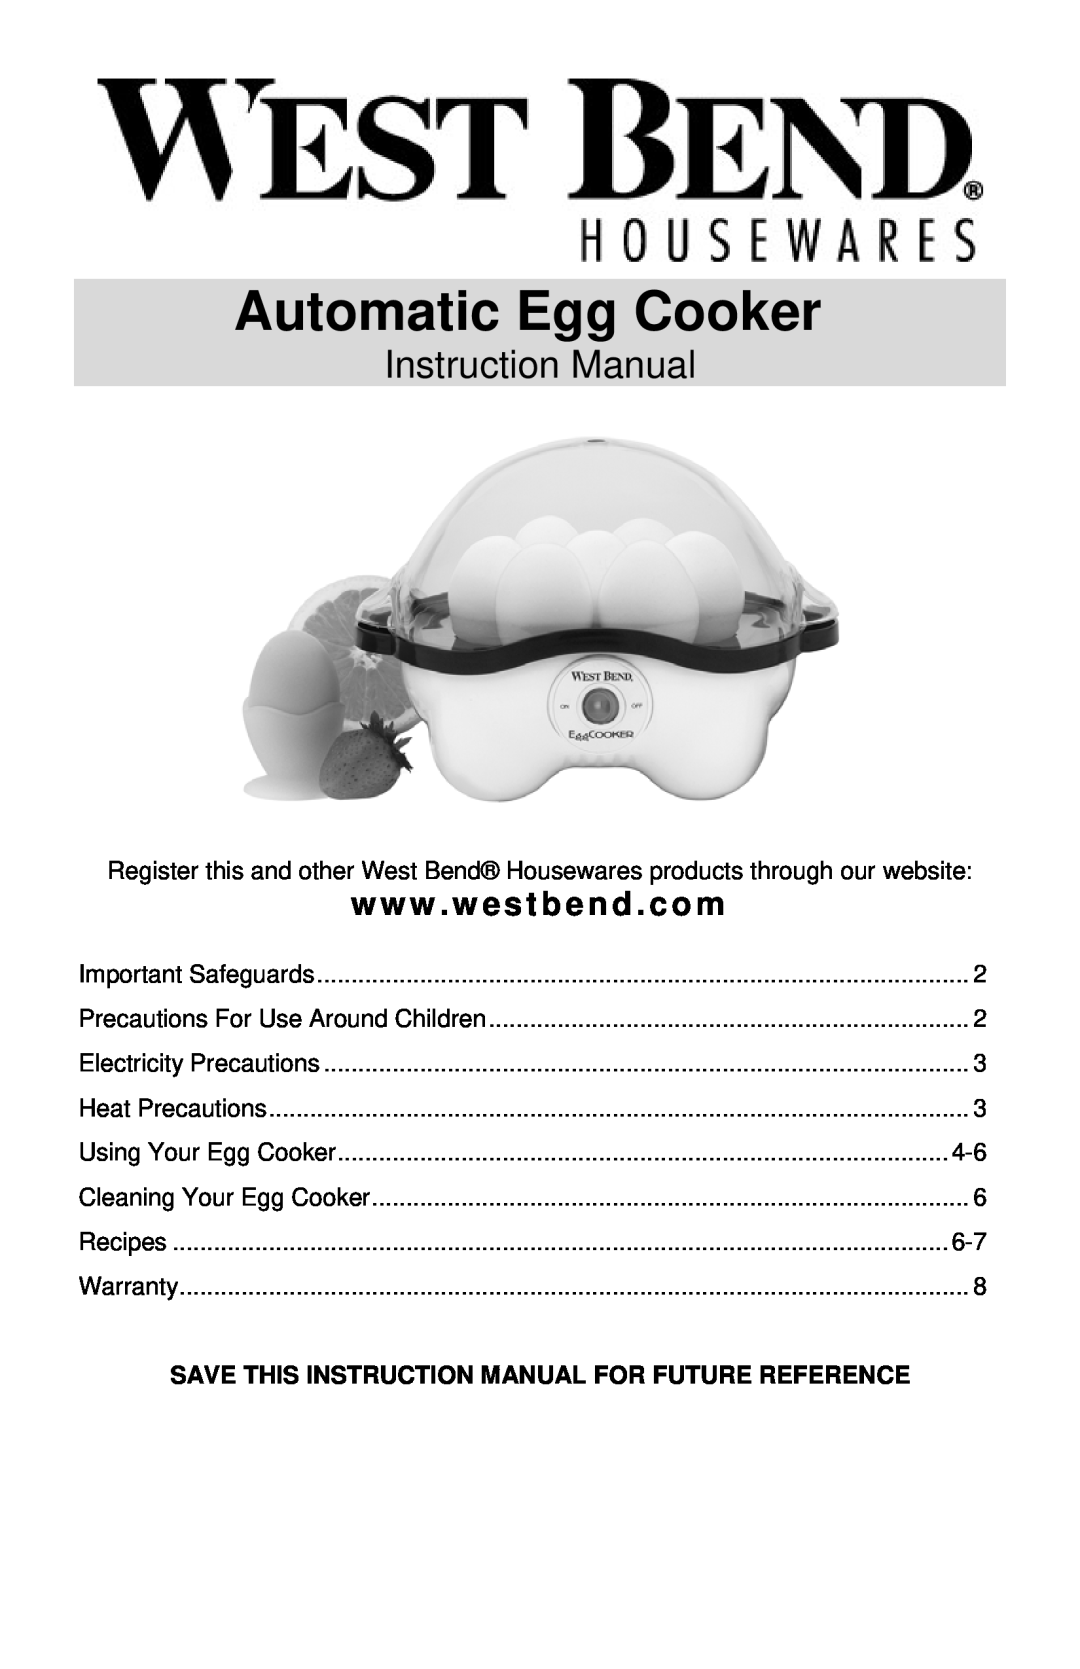 West Bend Automatic Egg Cooker instruction manual Instruction Manual, www . westbend . com 